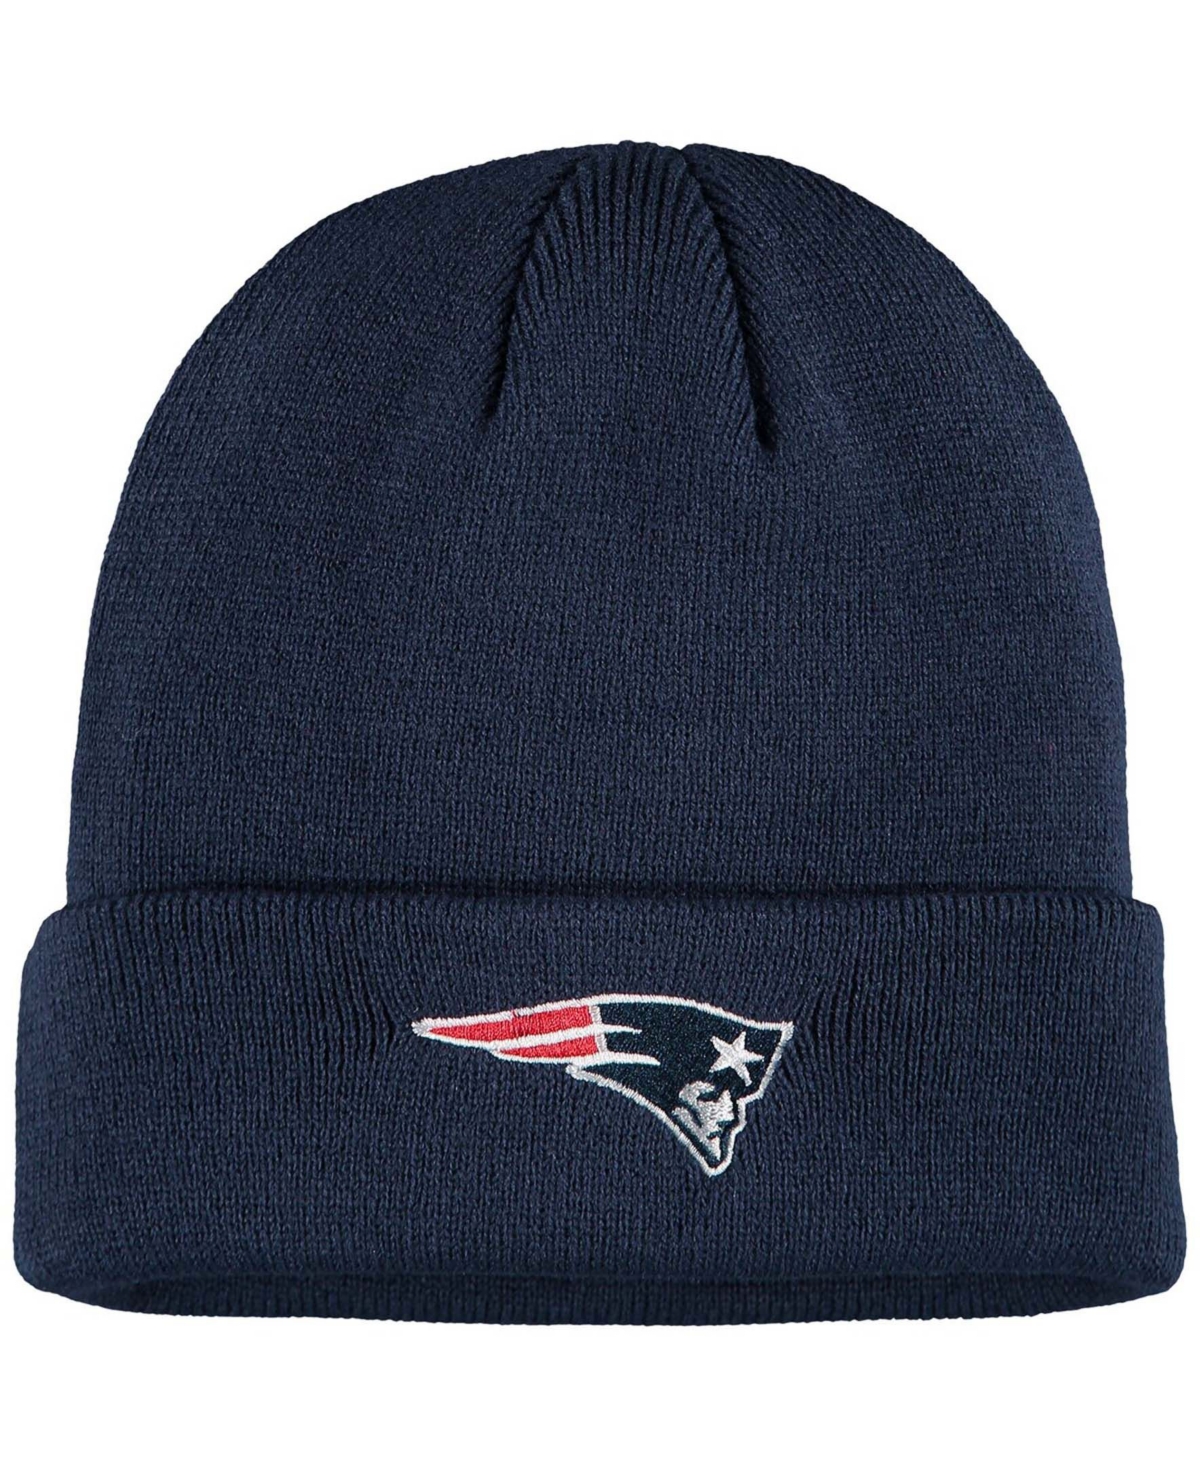 Outerstuff Kids' Big Boys And Girls Navy New England Patriots Basic Cuffed Knit Hat